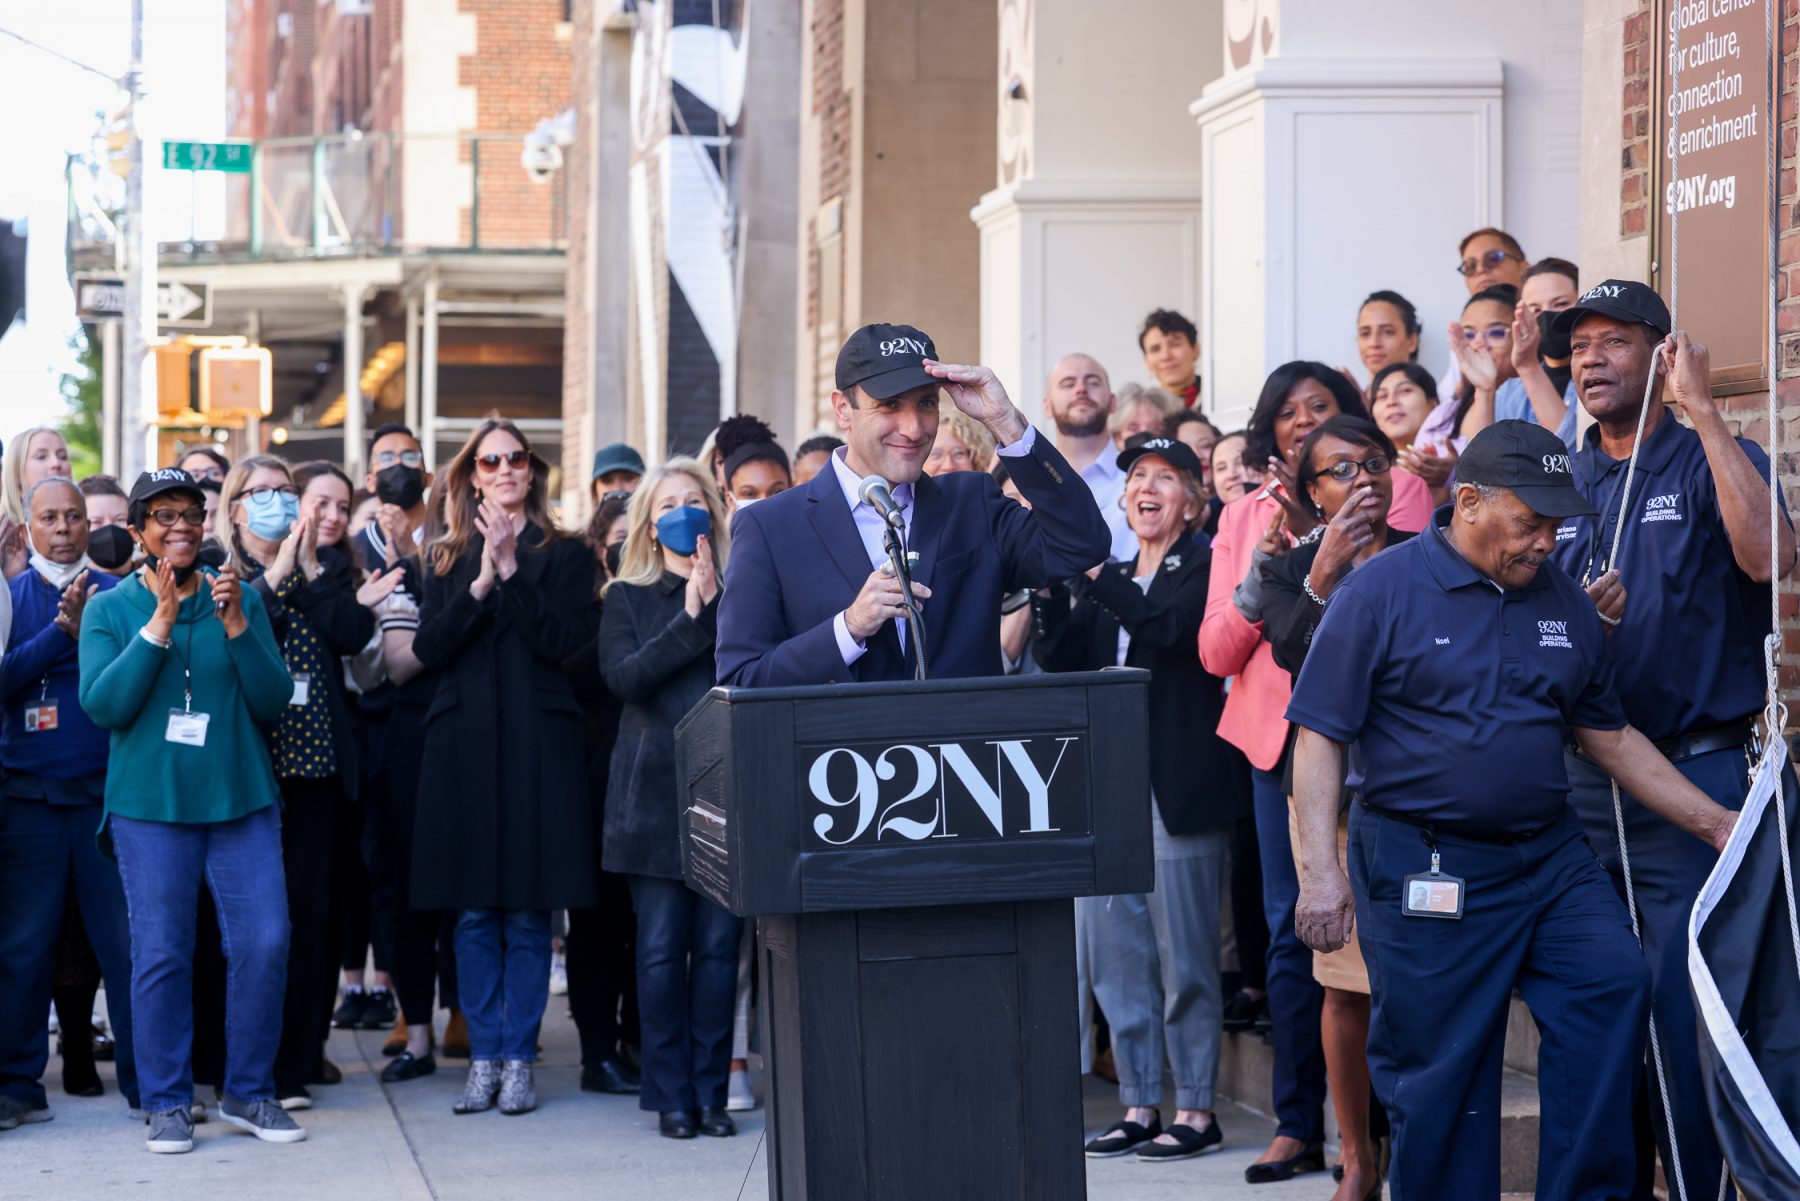 The 92nd Street Y Announces Major Post-COVID Transformation